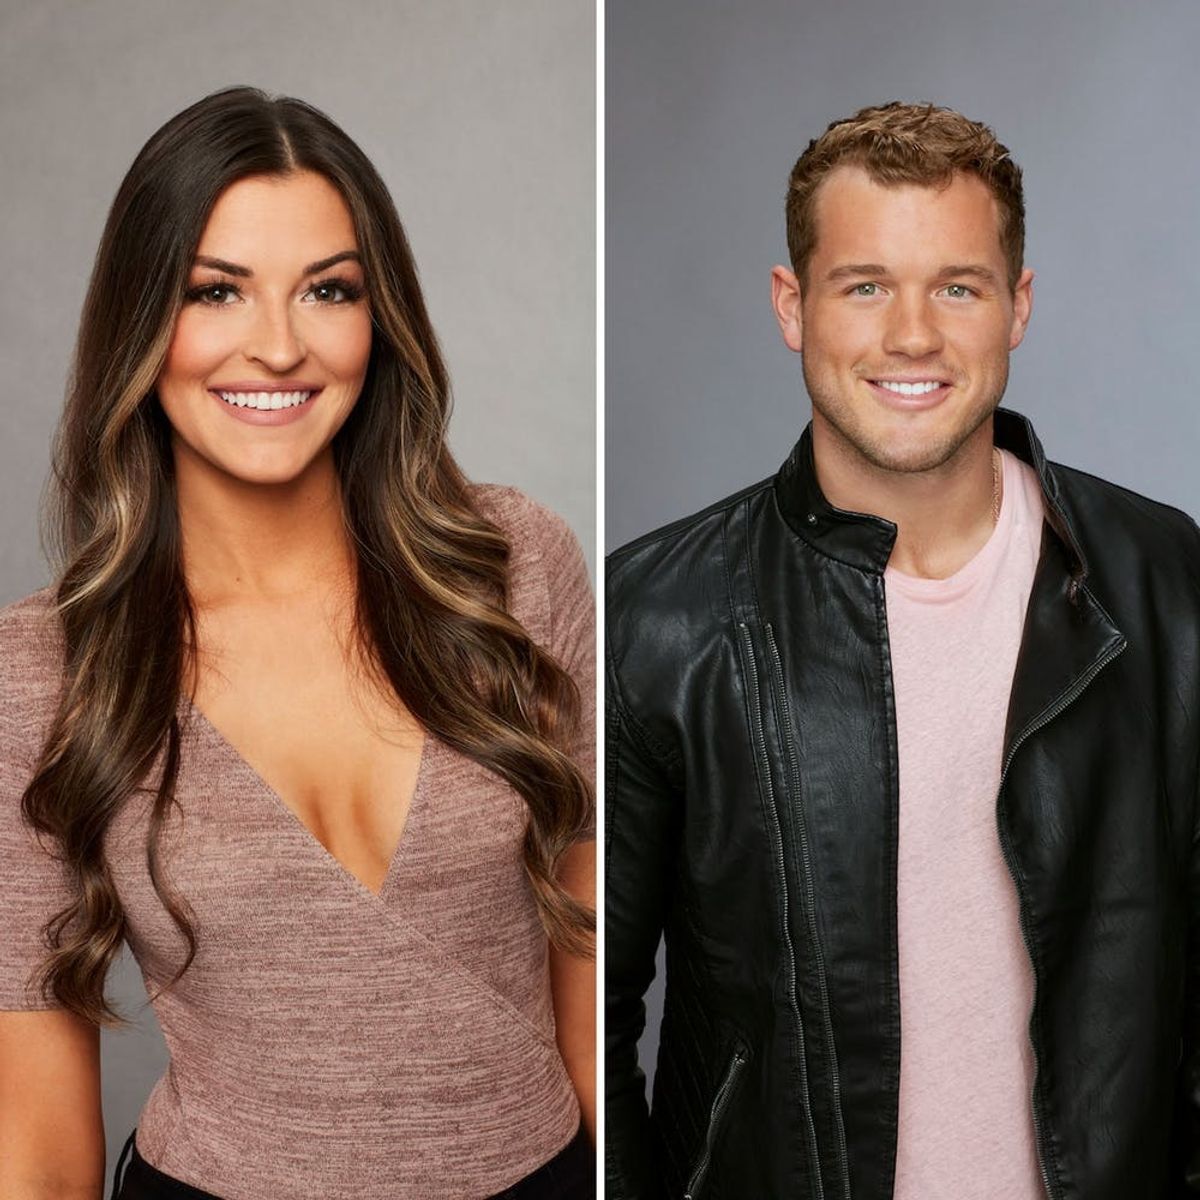 Tia Booth Explains What Really Happened Between Her and the Bachelorette’s Colton Underwood